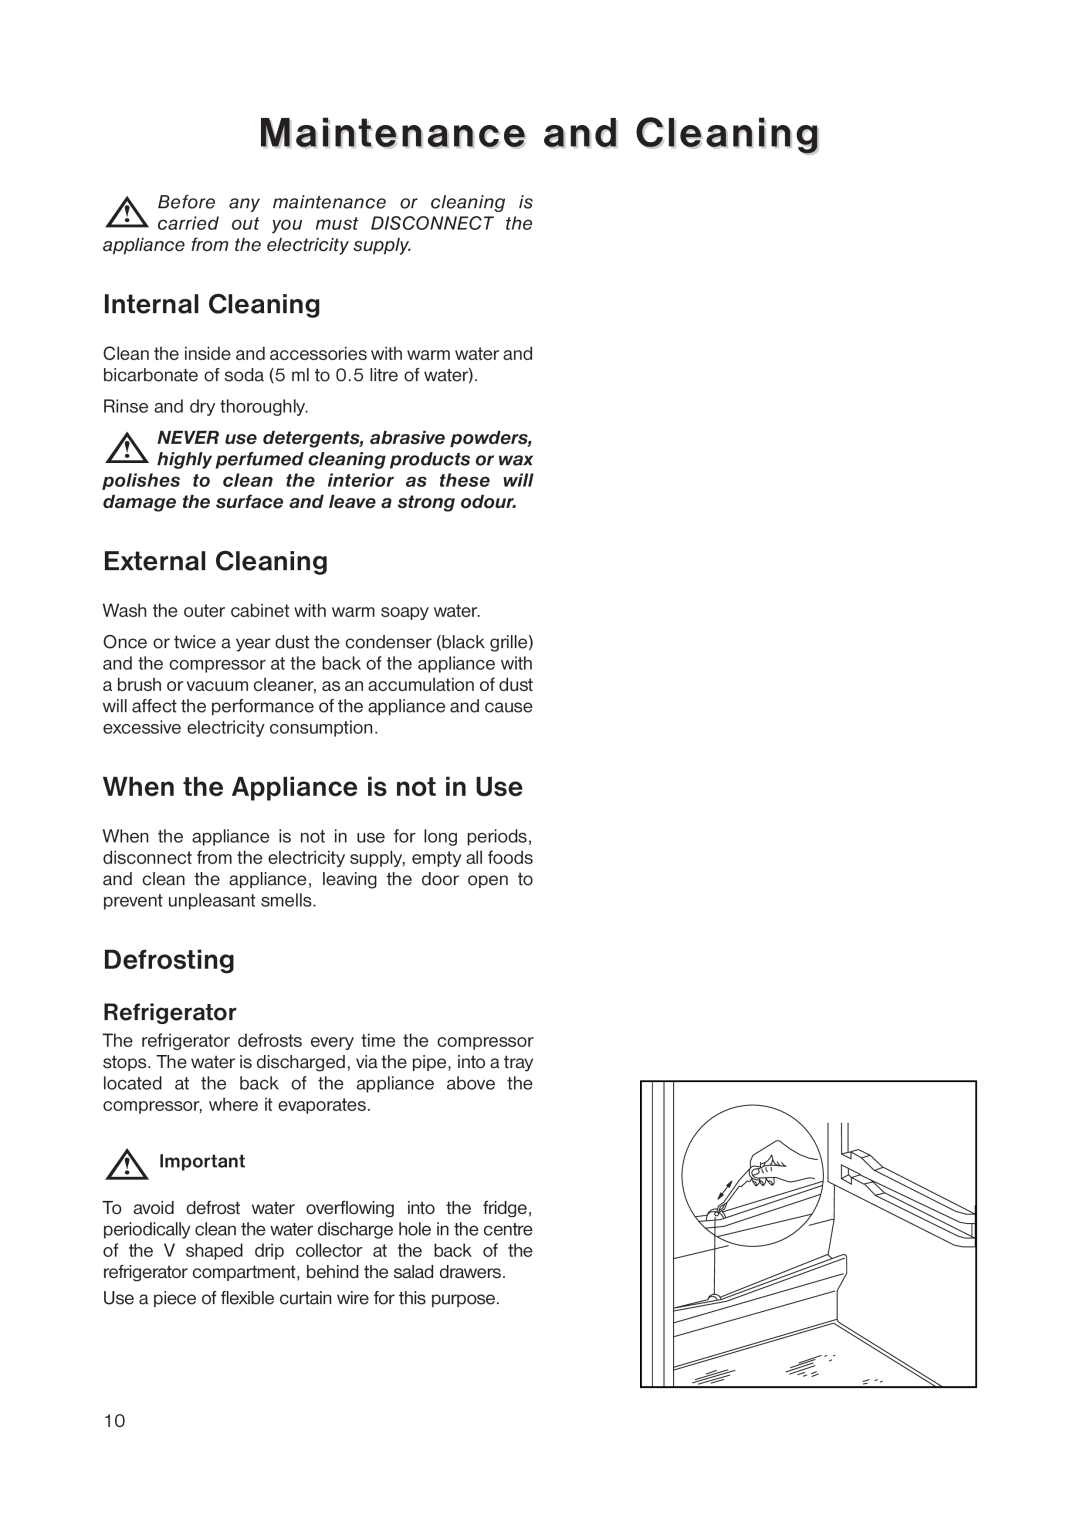 Zanussi ZRB 3041 manual Maintenance and Cleaning, Internal Cleaning, External Cleaning, When the Appliance is not in Use 